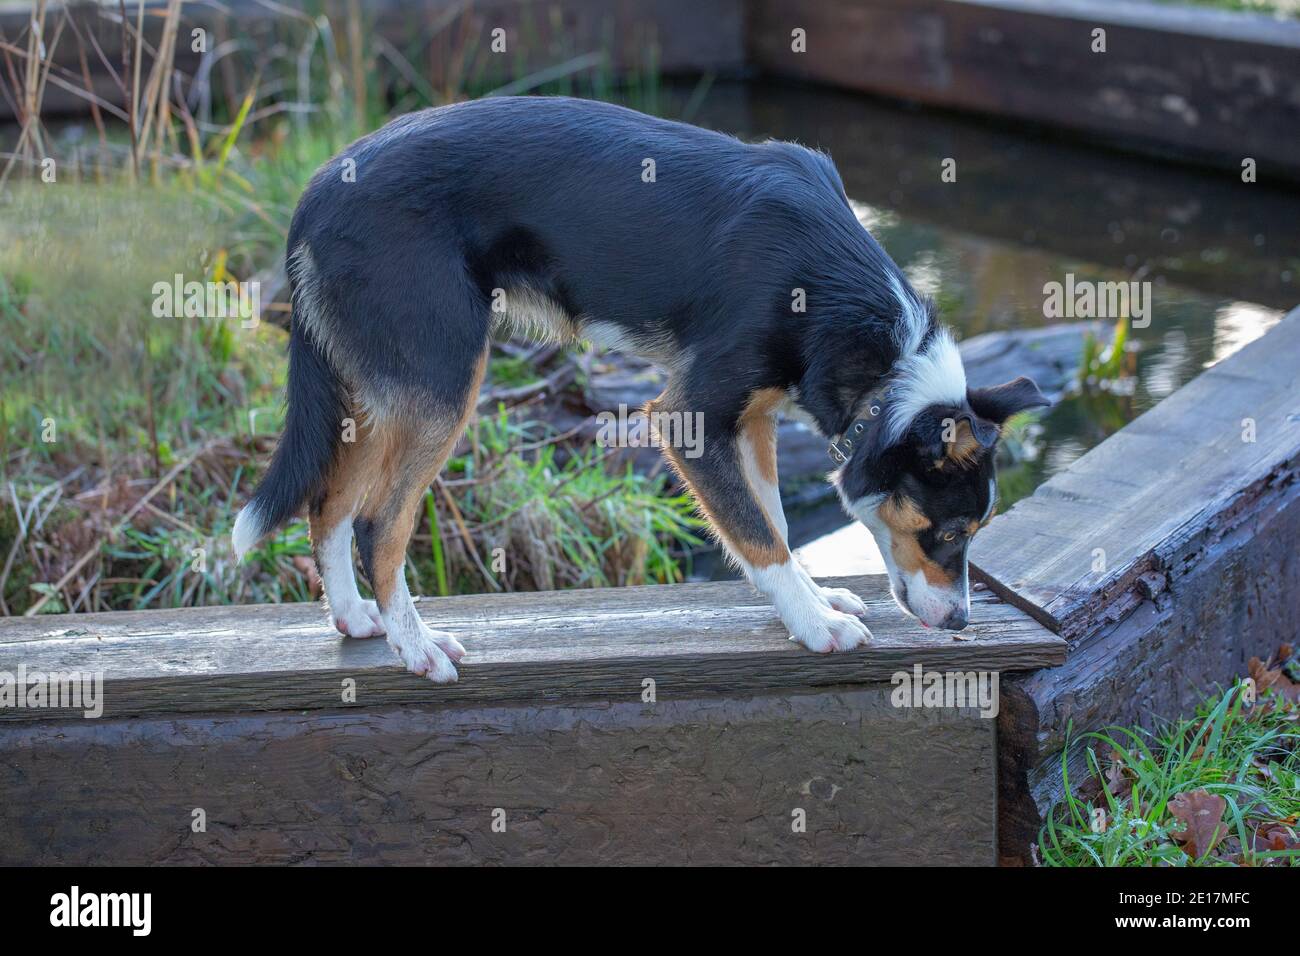 Tri-coloured Border Collie Dog (Canis lupus familiaris). Domestic animal, pet, companion, working, shepherding breed. Standing on a plank. Stock Photo